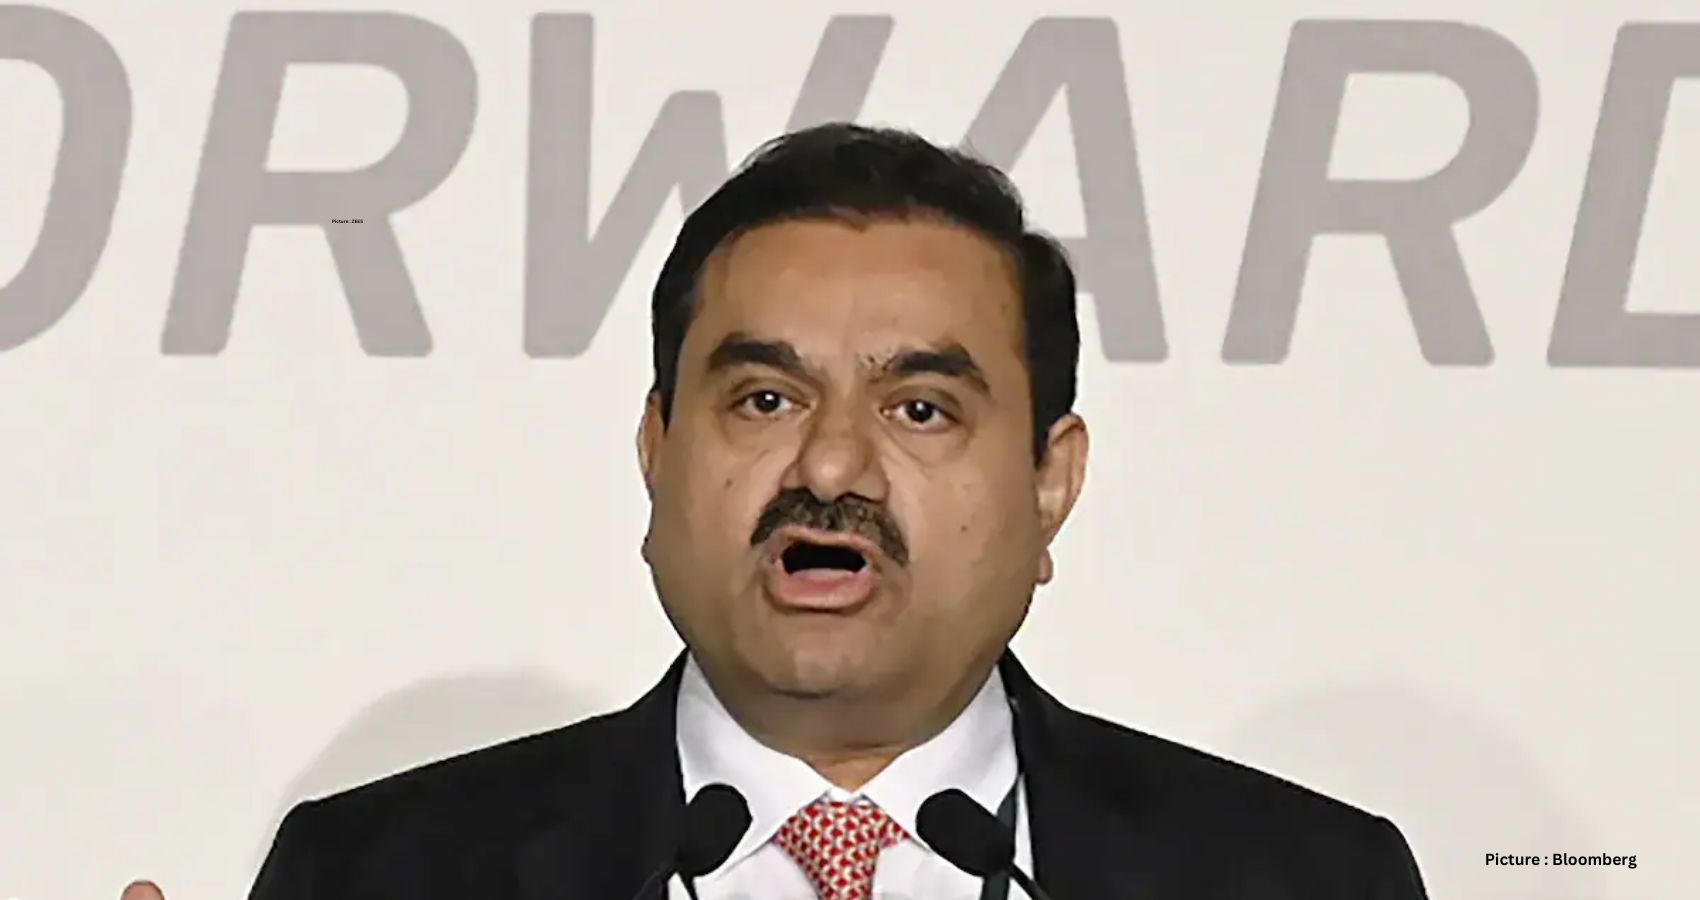 Featured & Cover Gautam Adani Resumes Position as Asia's Wealthiest Person Amidst Legal Respite